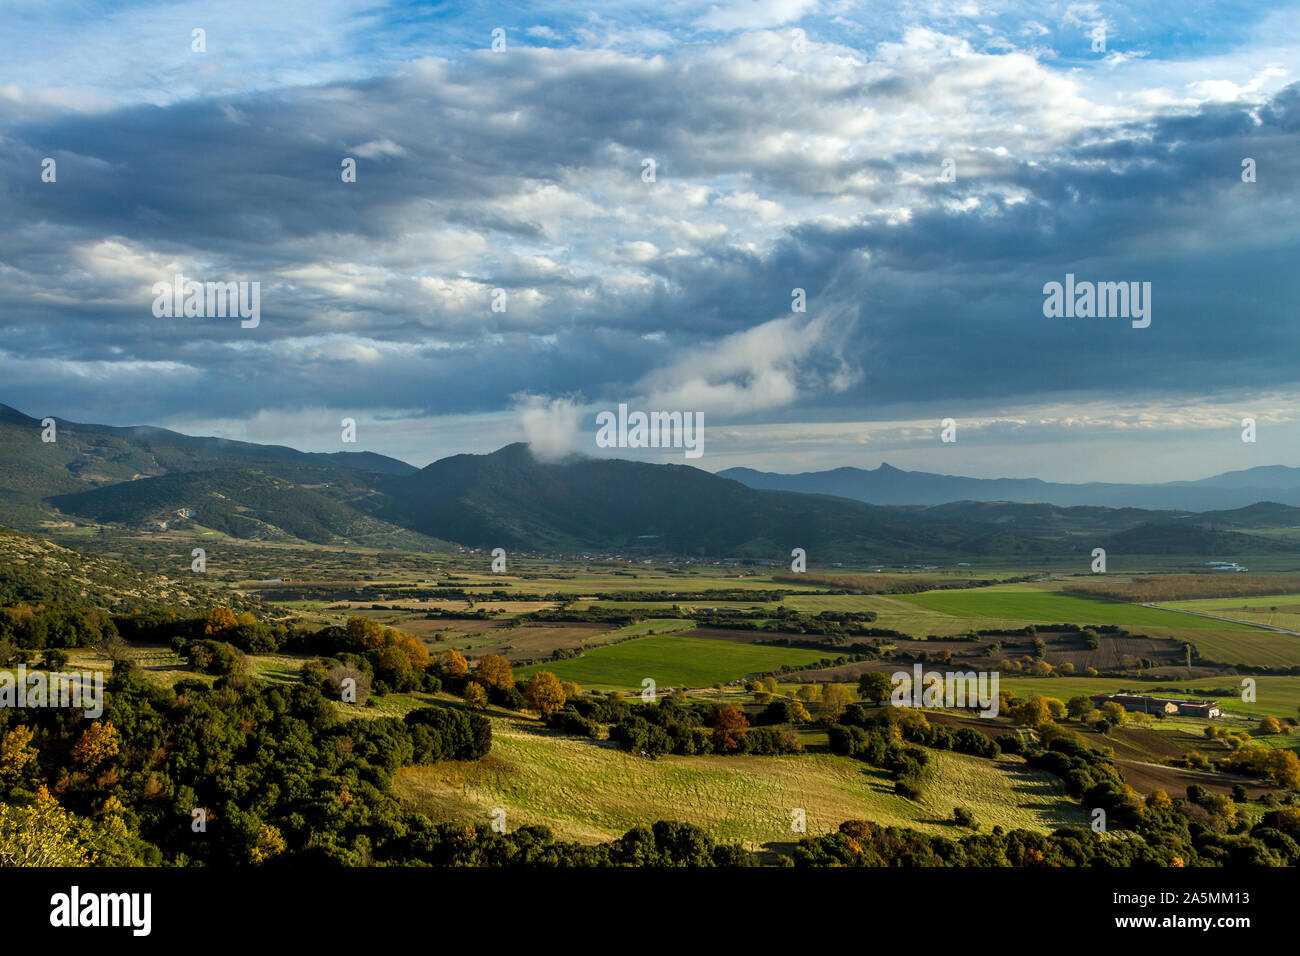 Greece, autumnal landscape at the fields of Pieria, near Olympus mountain. Stock Photo